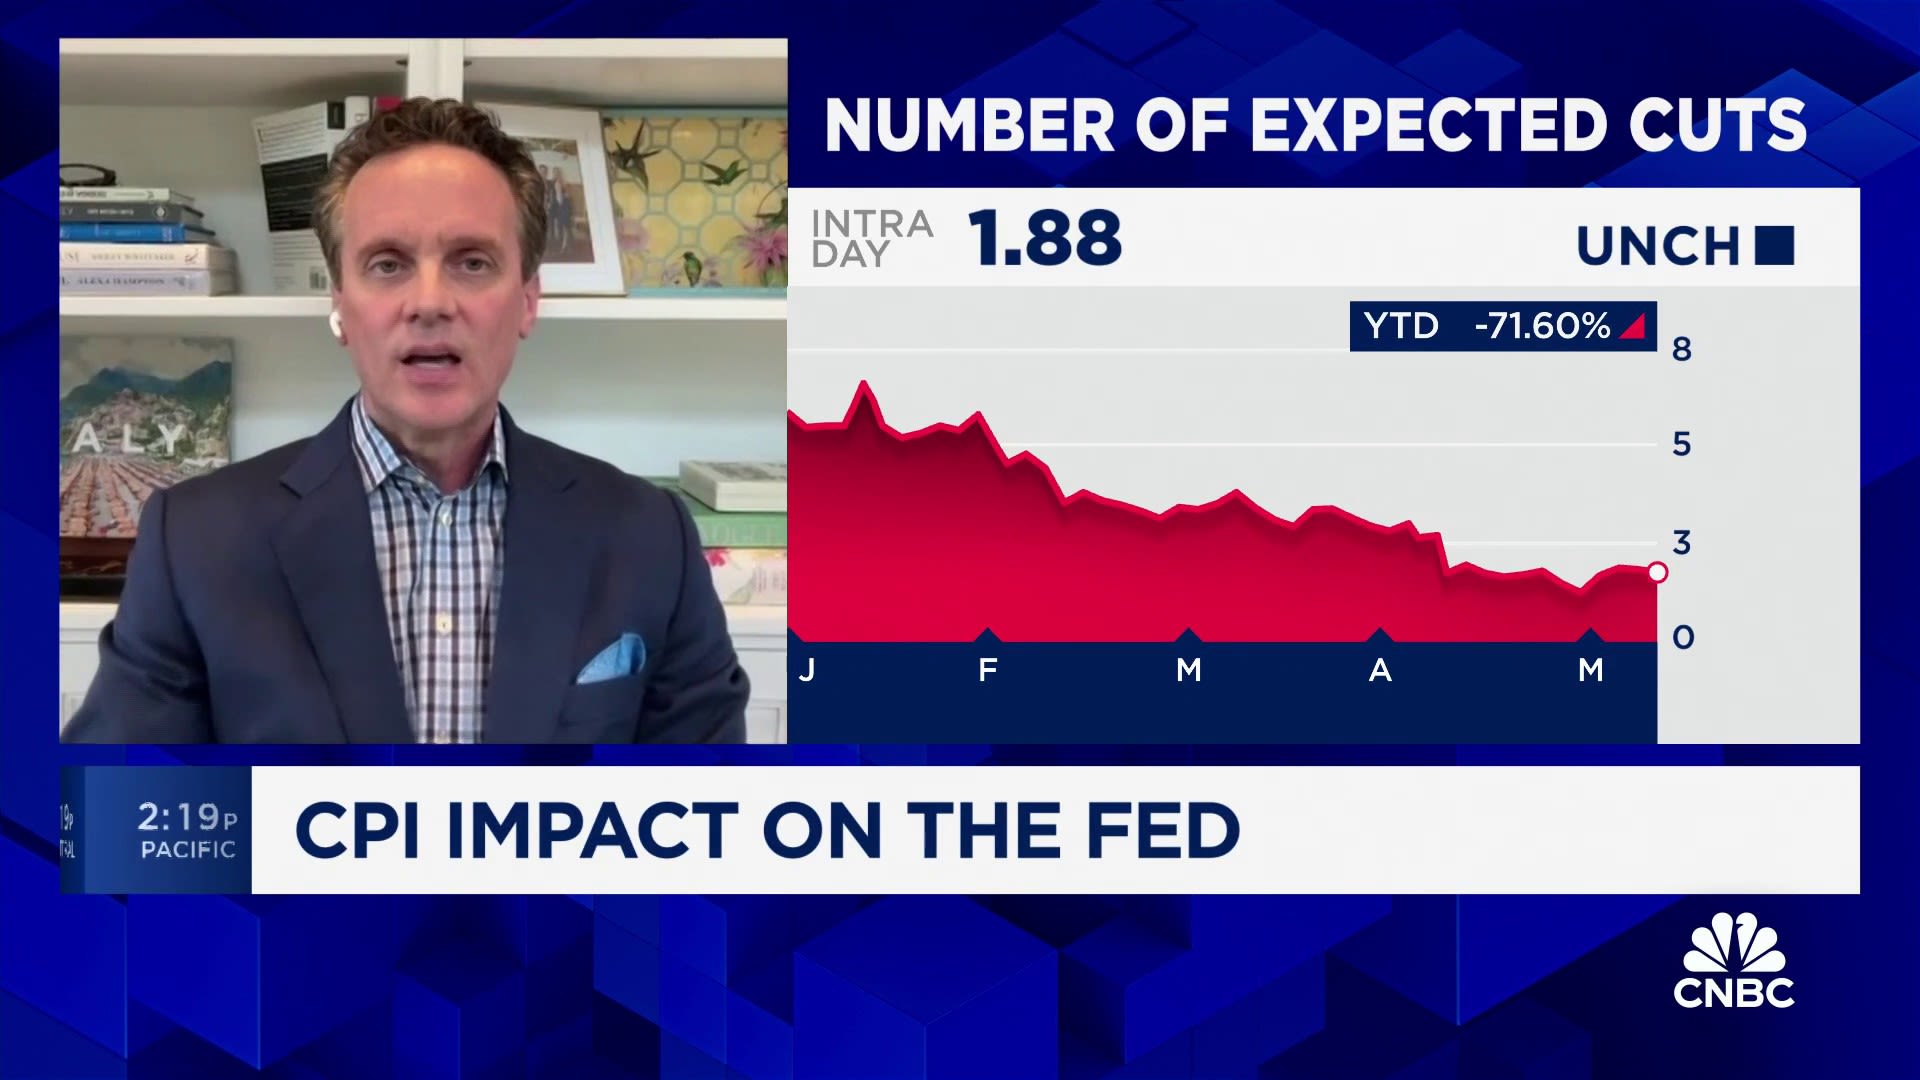 Healthcare costs will keep PCE elevated out of Fed’s target range, says economist Joe Lavorgna [Video]